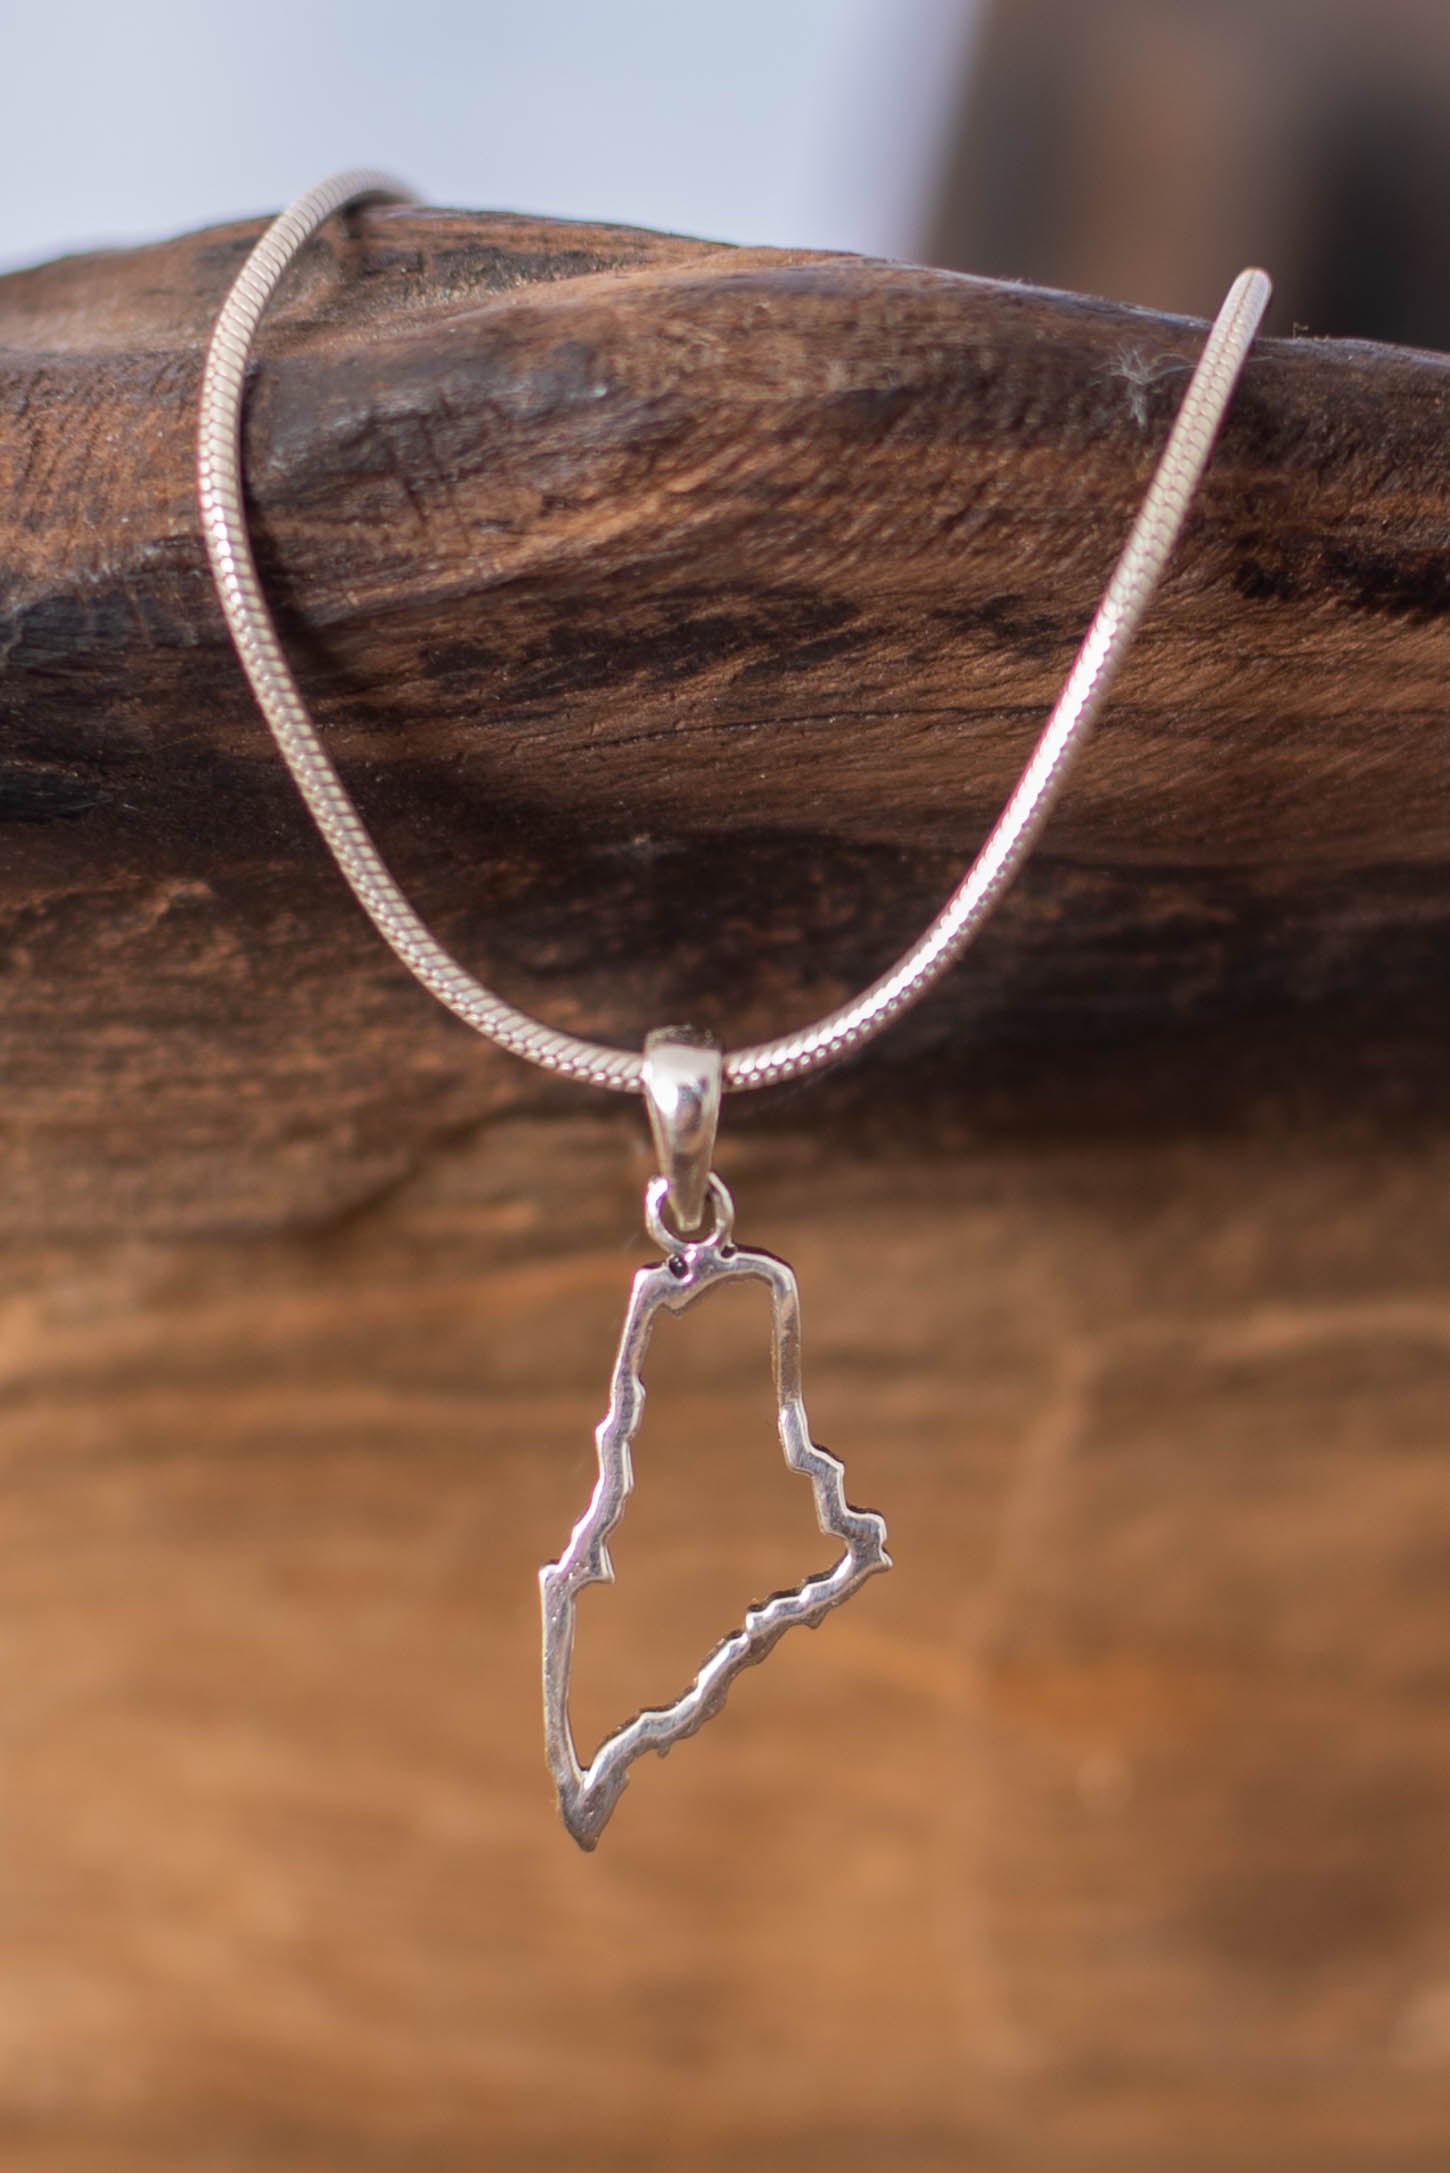 State Of Maine Outline Pendant